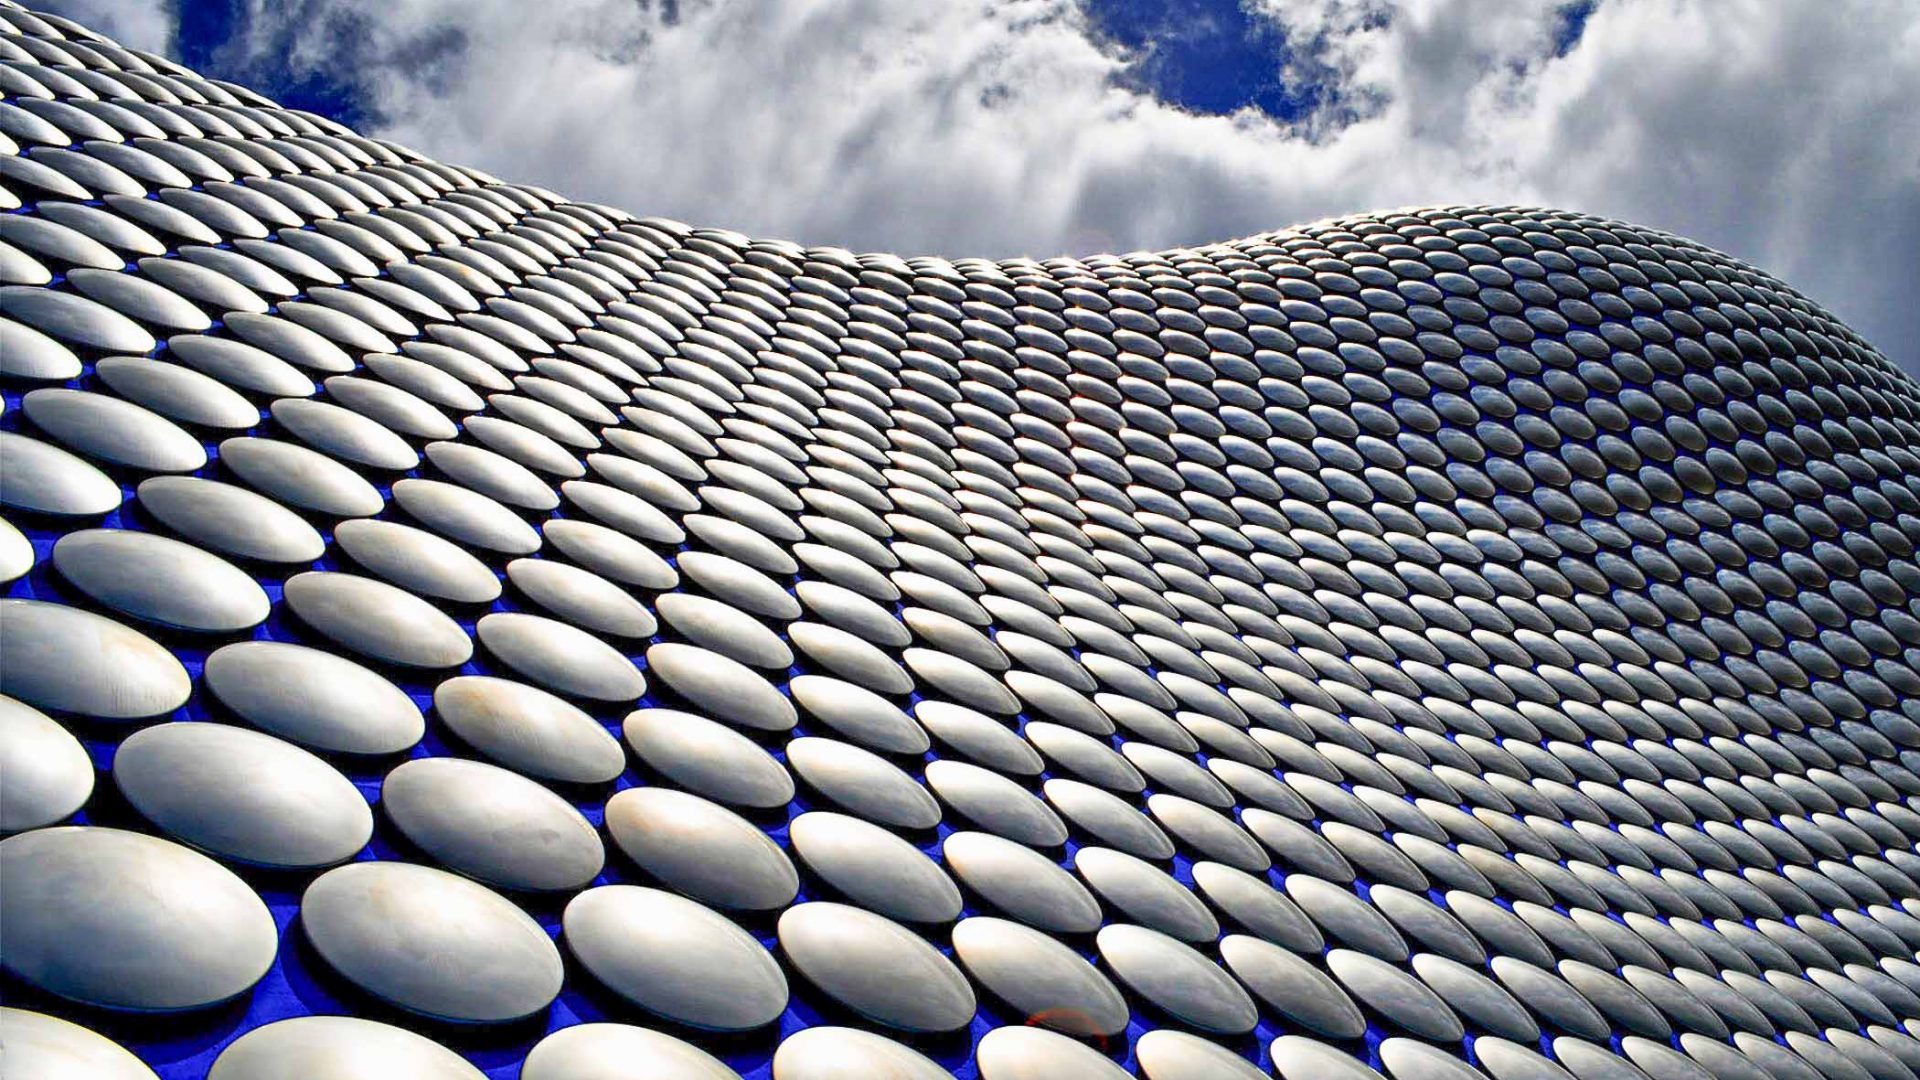 The stunning Bull Ring and Grand Central shopping mall in Birmingham, UK.